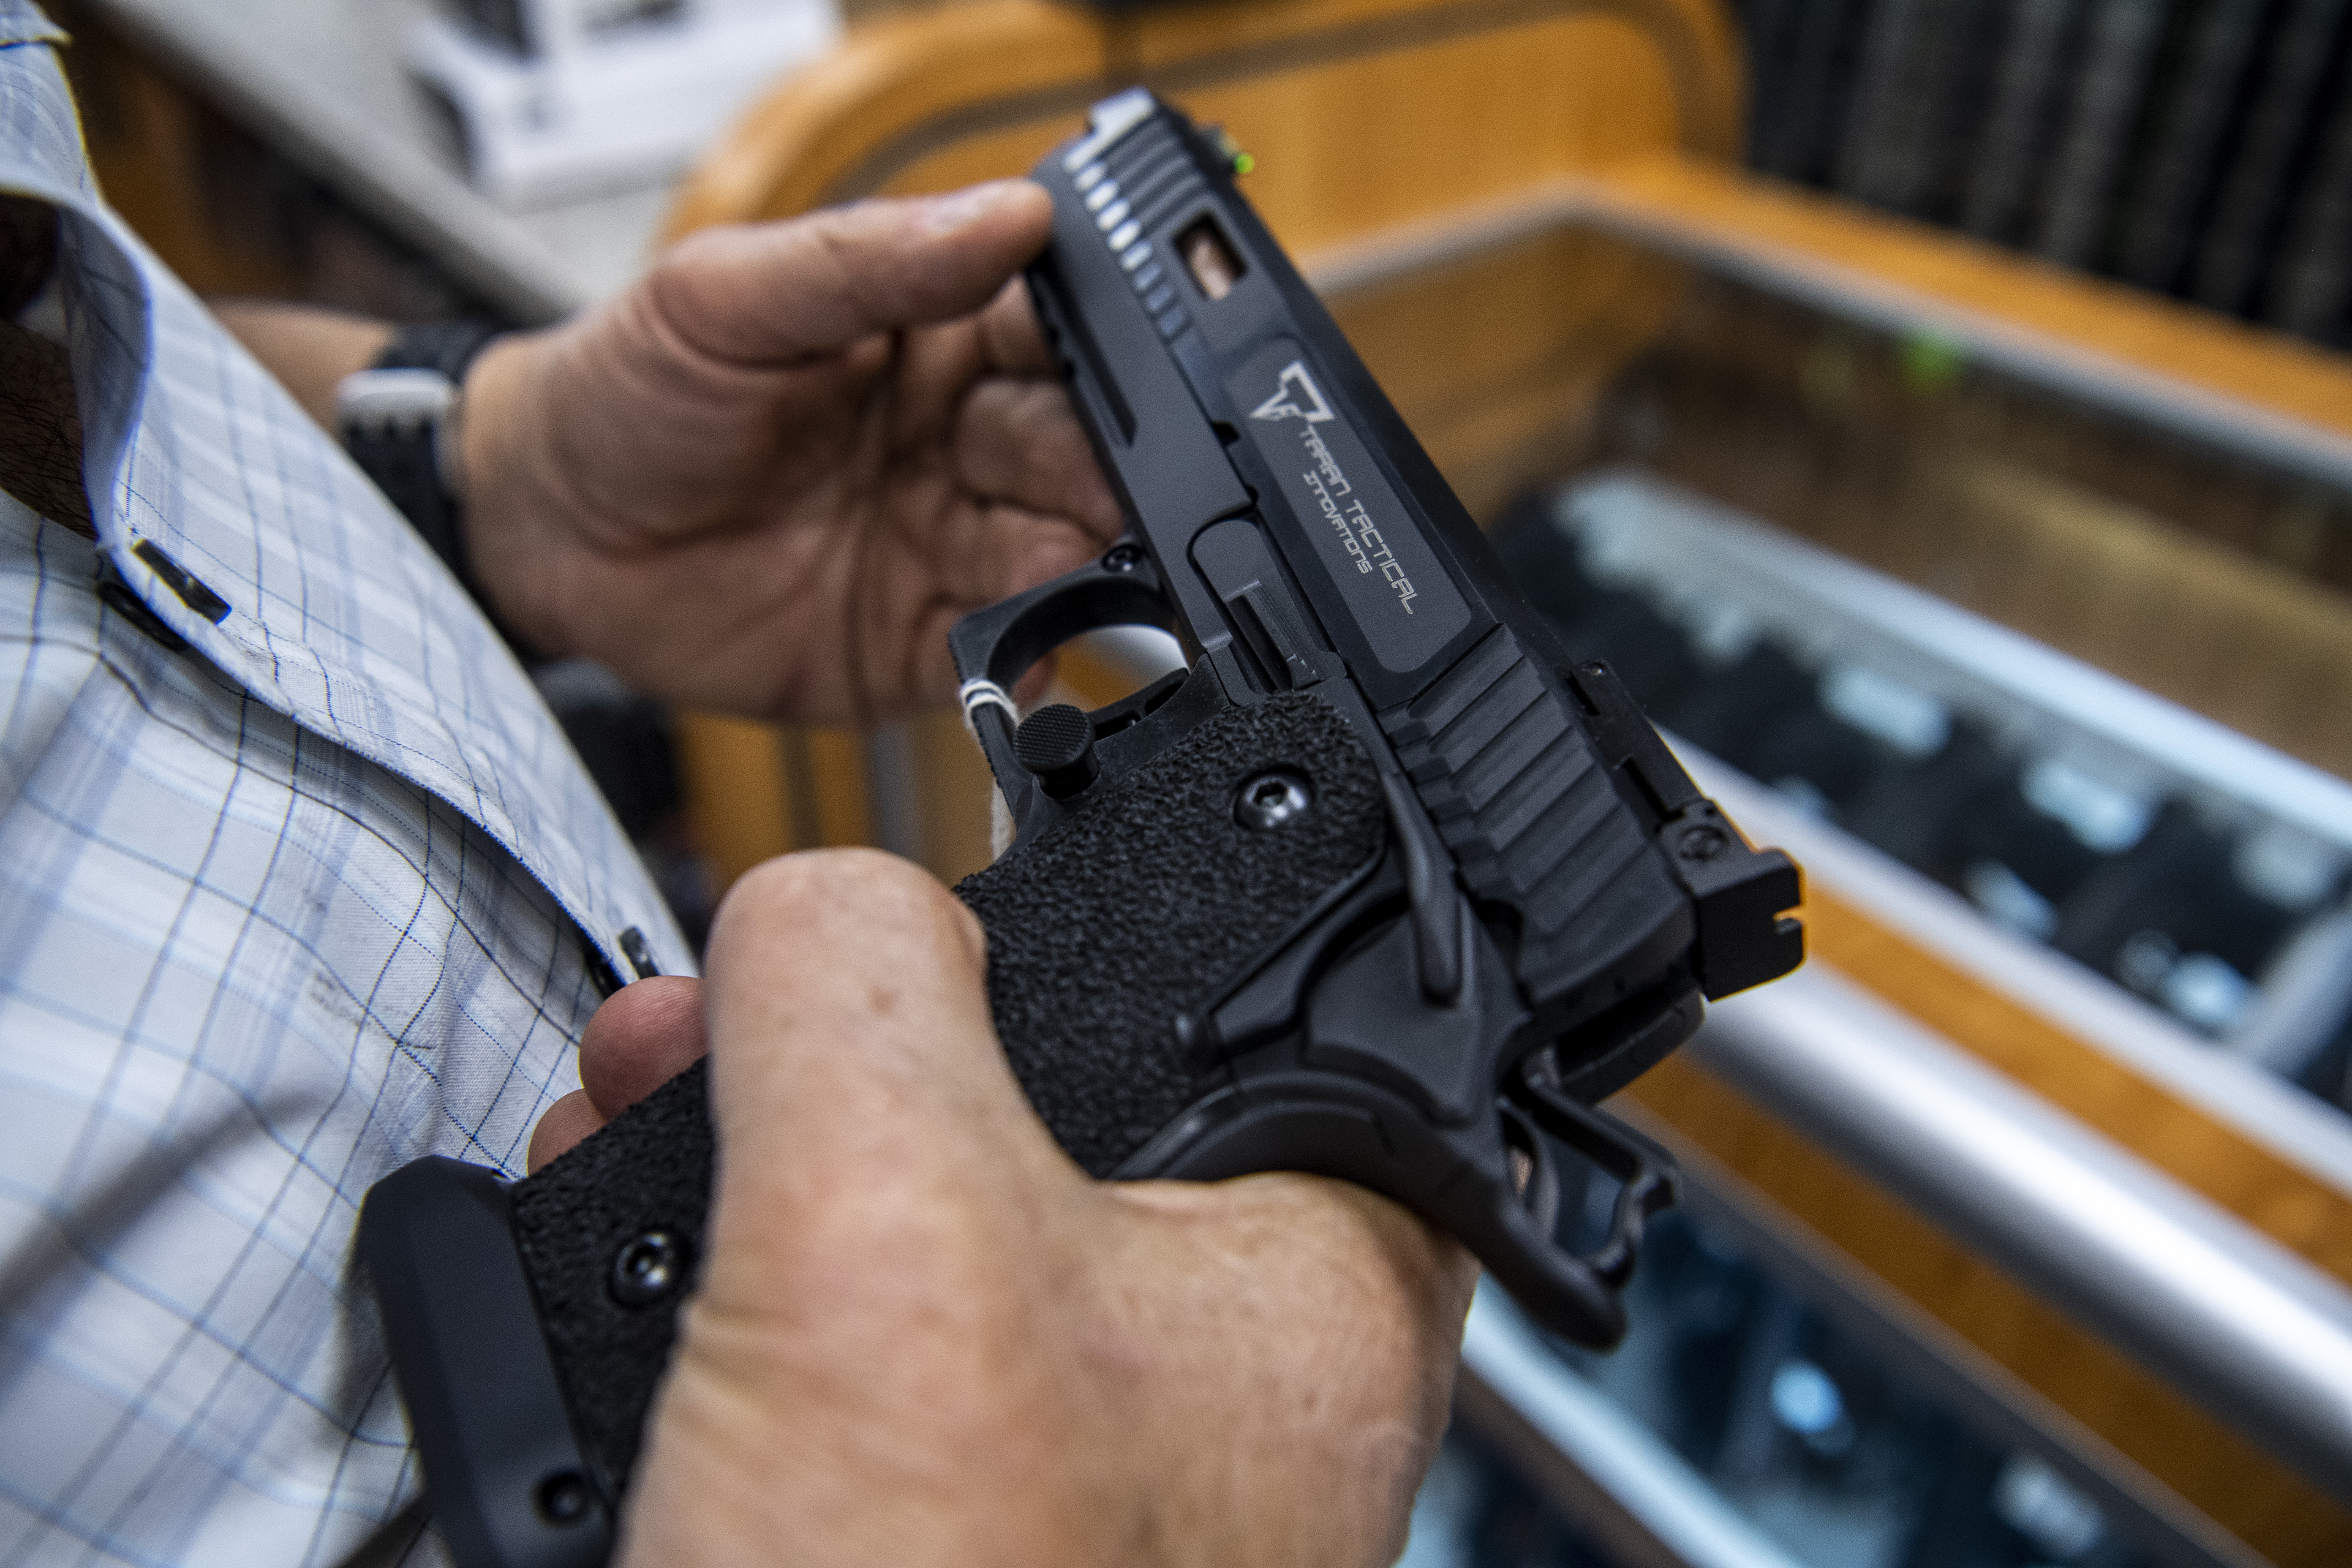 Hey, White House … your plan for gun safety runs counter to SCOTUS decision